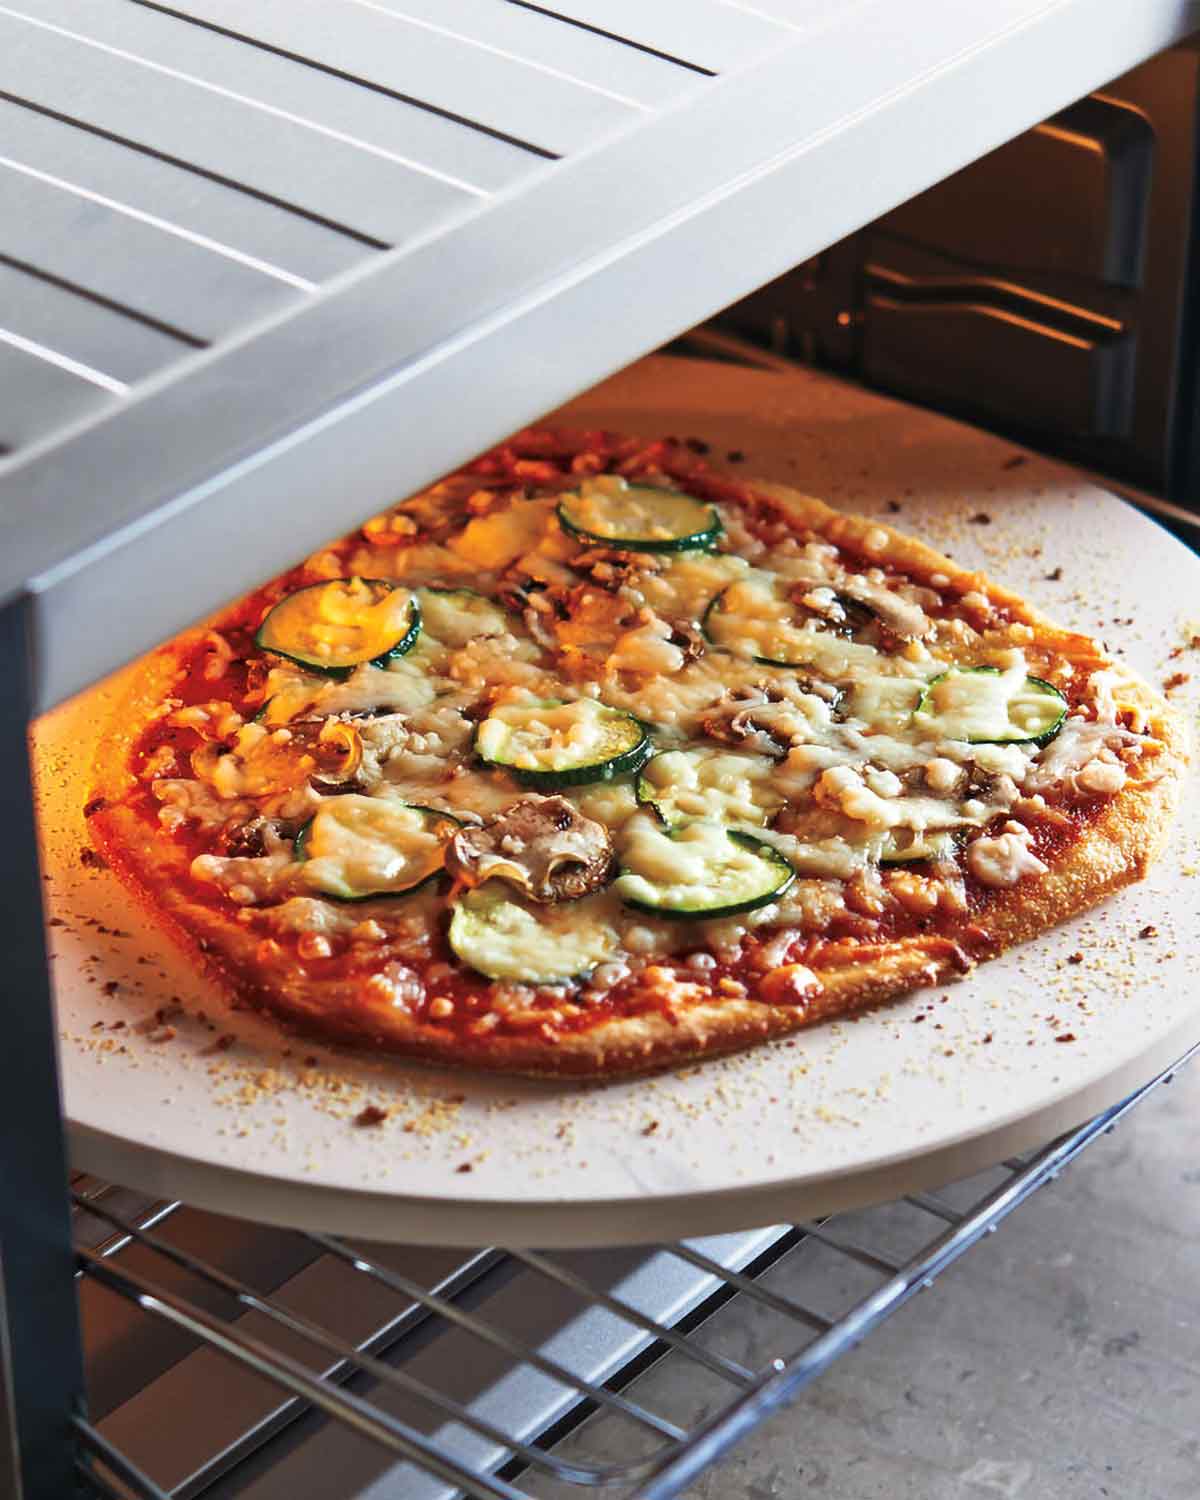 A cooked pizza on a pizza stone coming out of an oven.